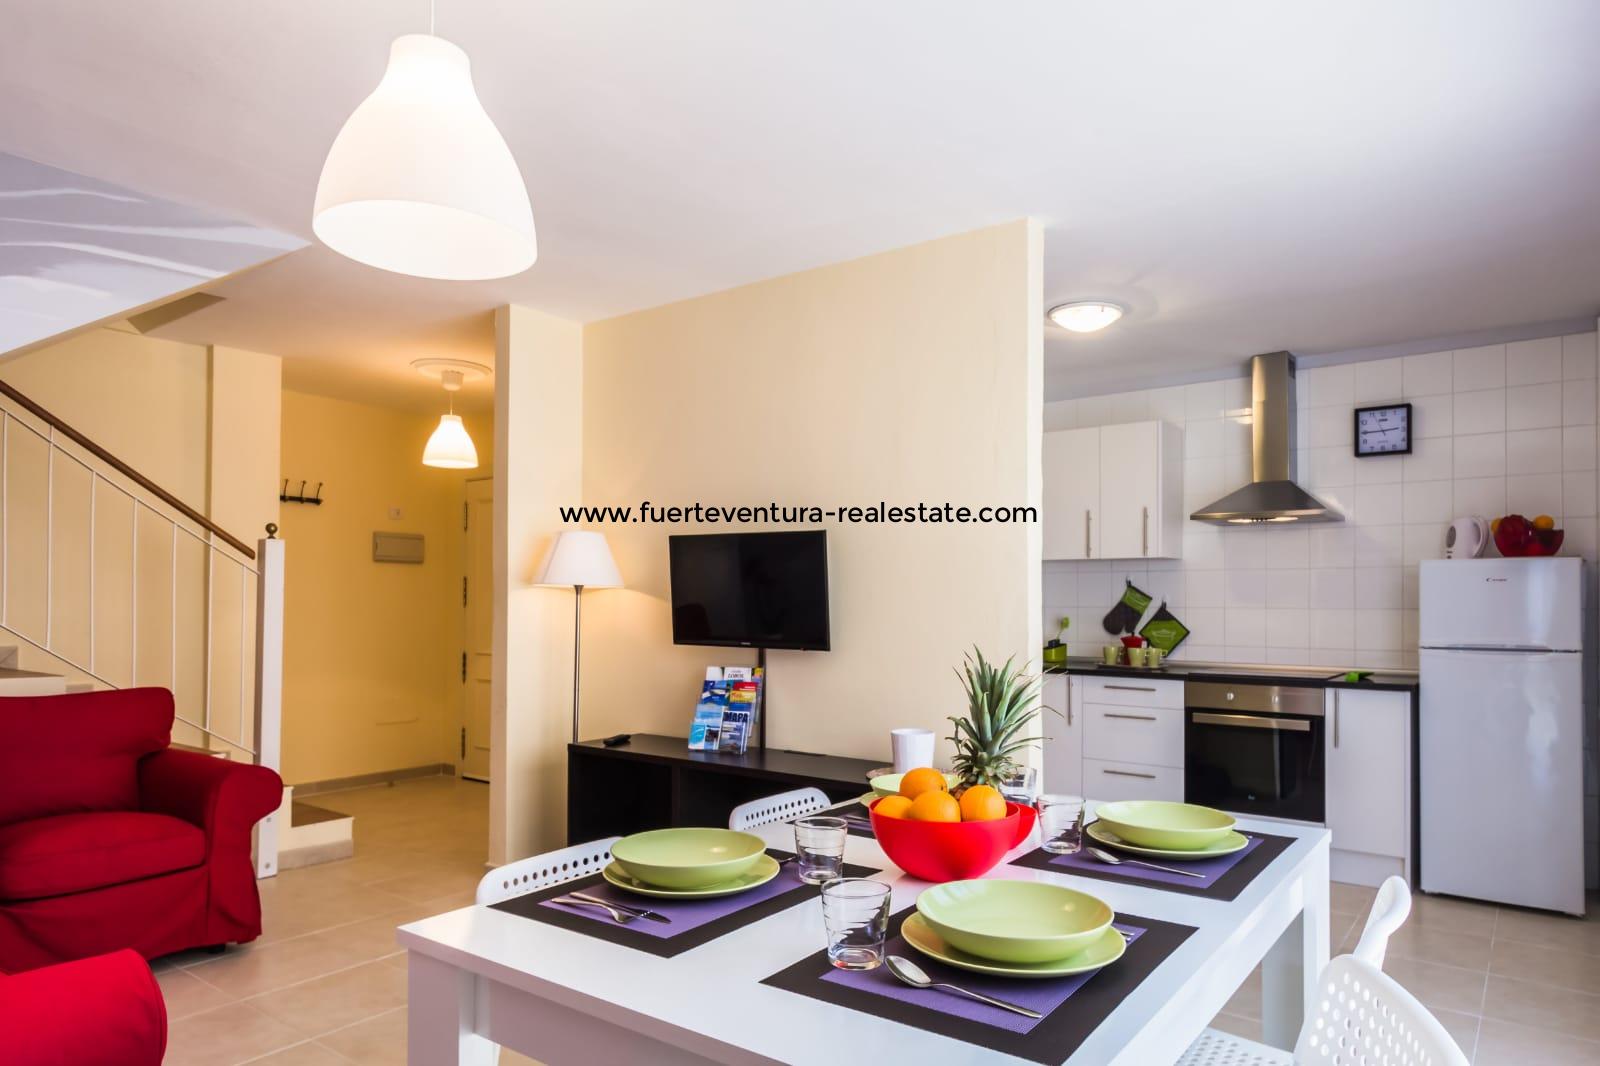 For sale! Beautiful apartment on 2 floors in the center of Corralejo